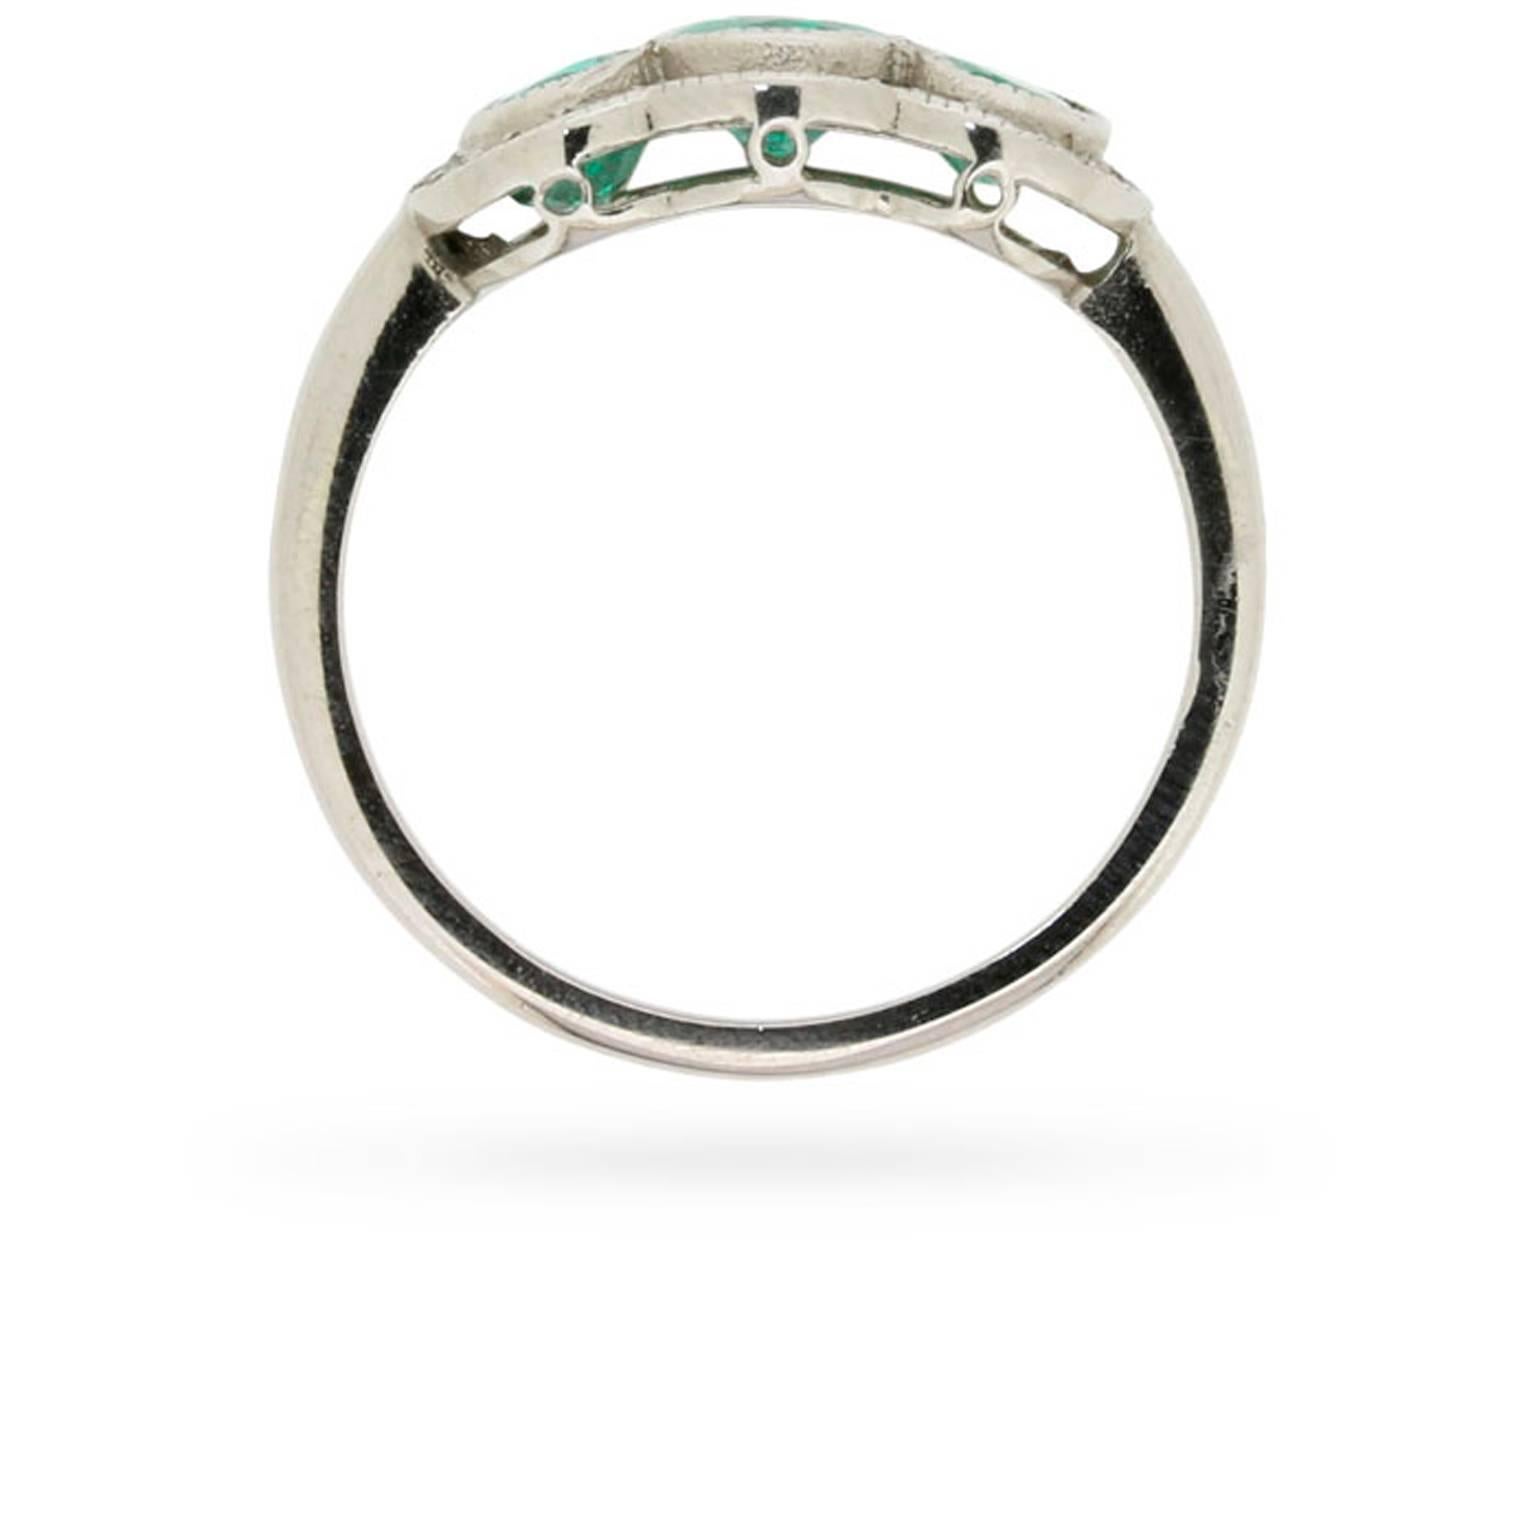 This vintage mid-century emerald and diamond ring has a soul much older than its years.

Dating from the 1950s, this ring features a resplendent trio of natural, oval-shaped emeralds in a verdant shade of green.

A grain set border of 0.30ct eight